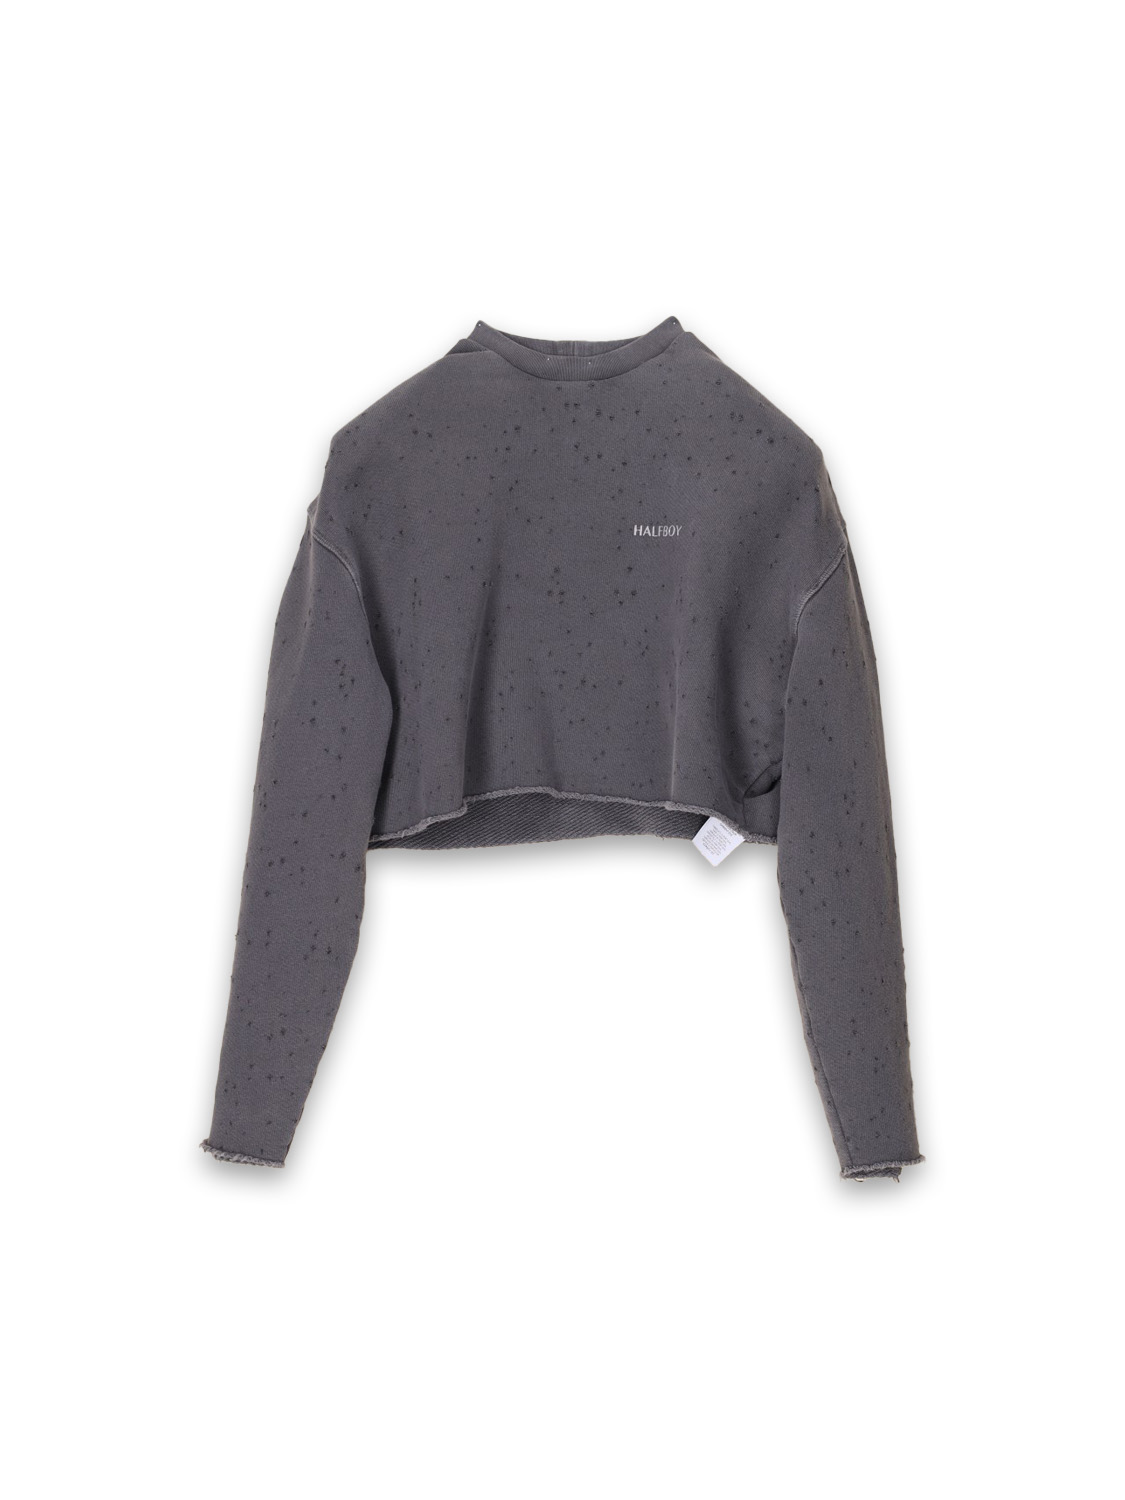 Halfboy Crew neck - Cropped sweater with shoulder pads   grey S